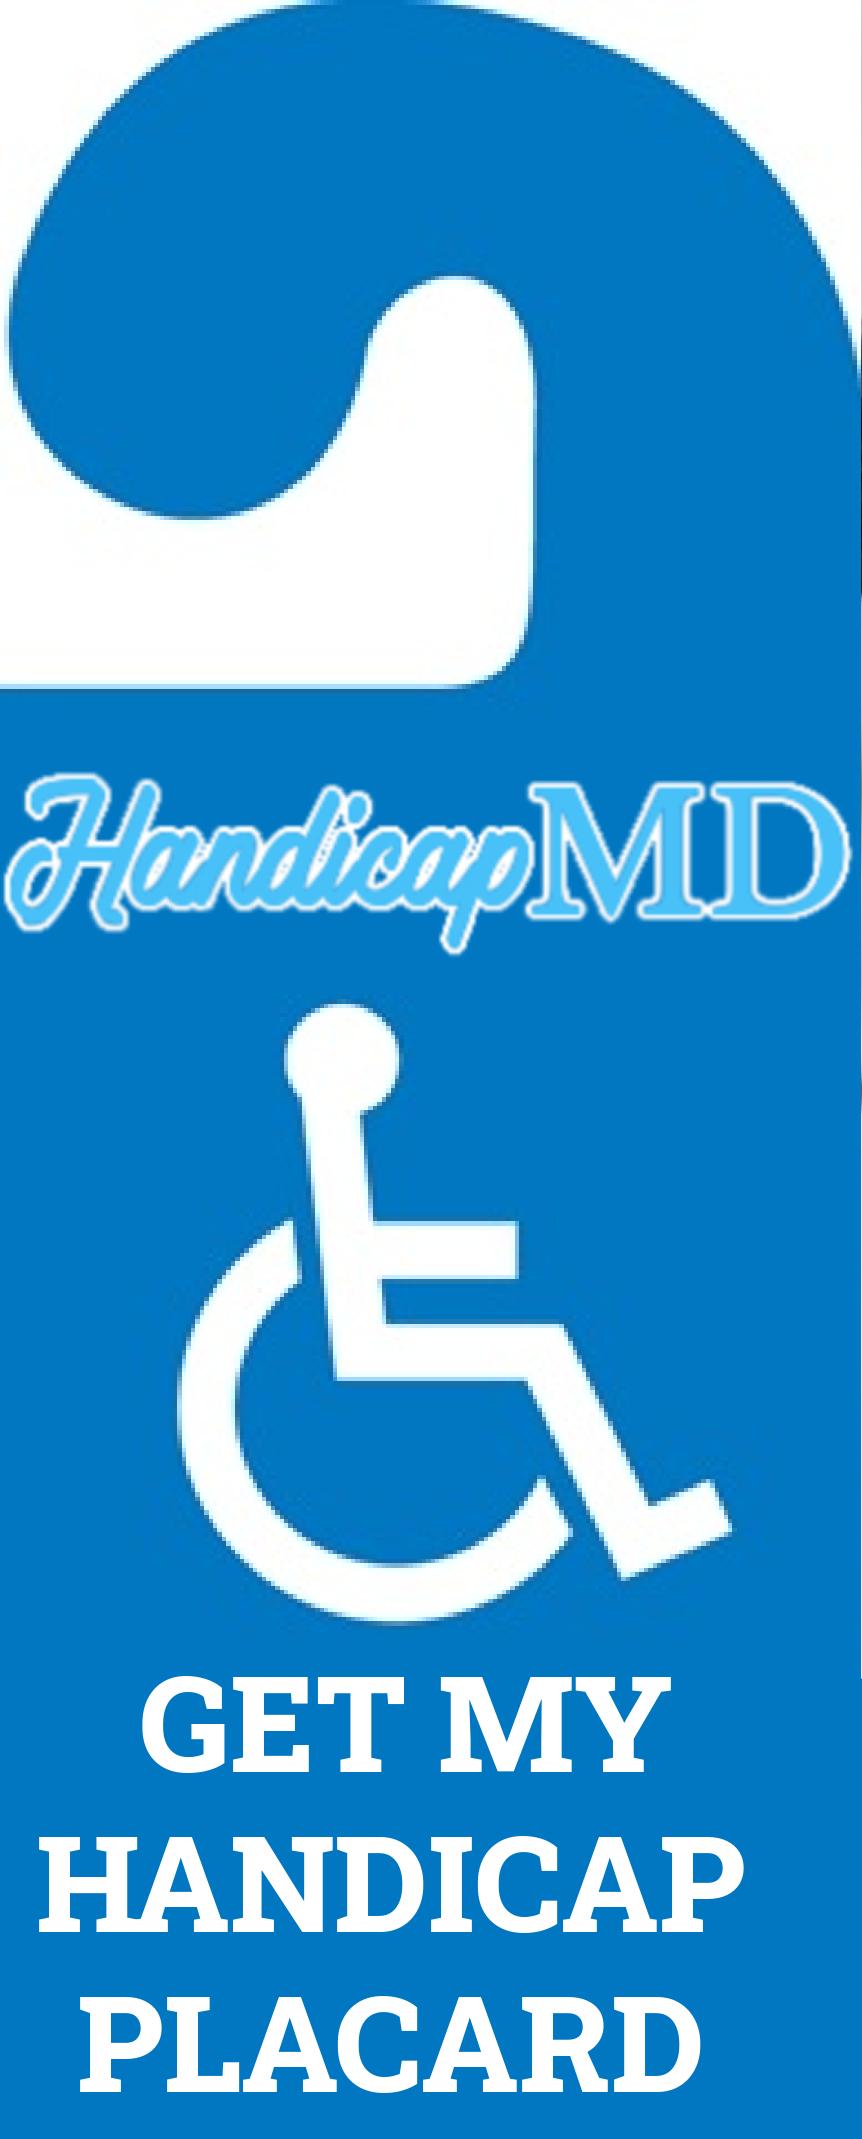 Who Can Prescribe Disabled Parking Permits?